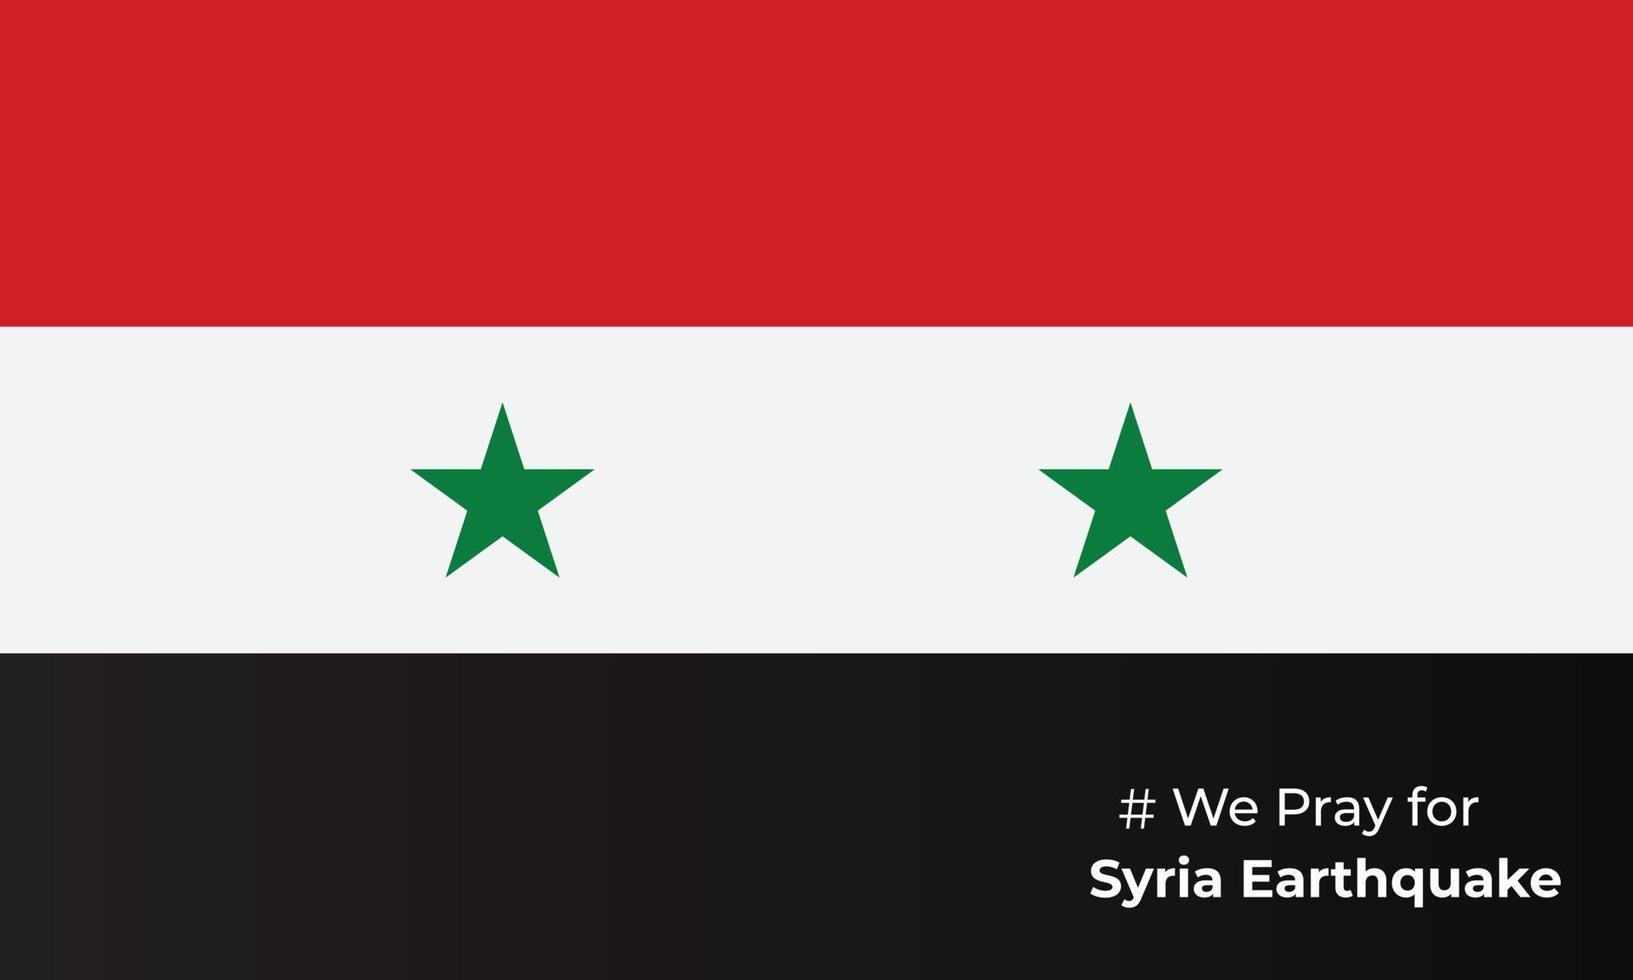 pray for syria earthquake syria national flag and map illustration Earthquake tragedy in syria background. syria earthquake disaster February 5, 2023 vector